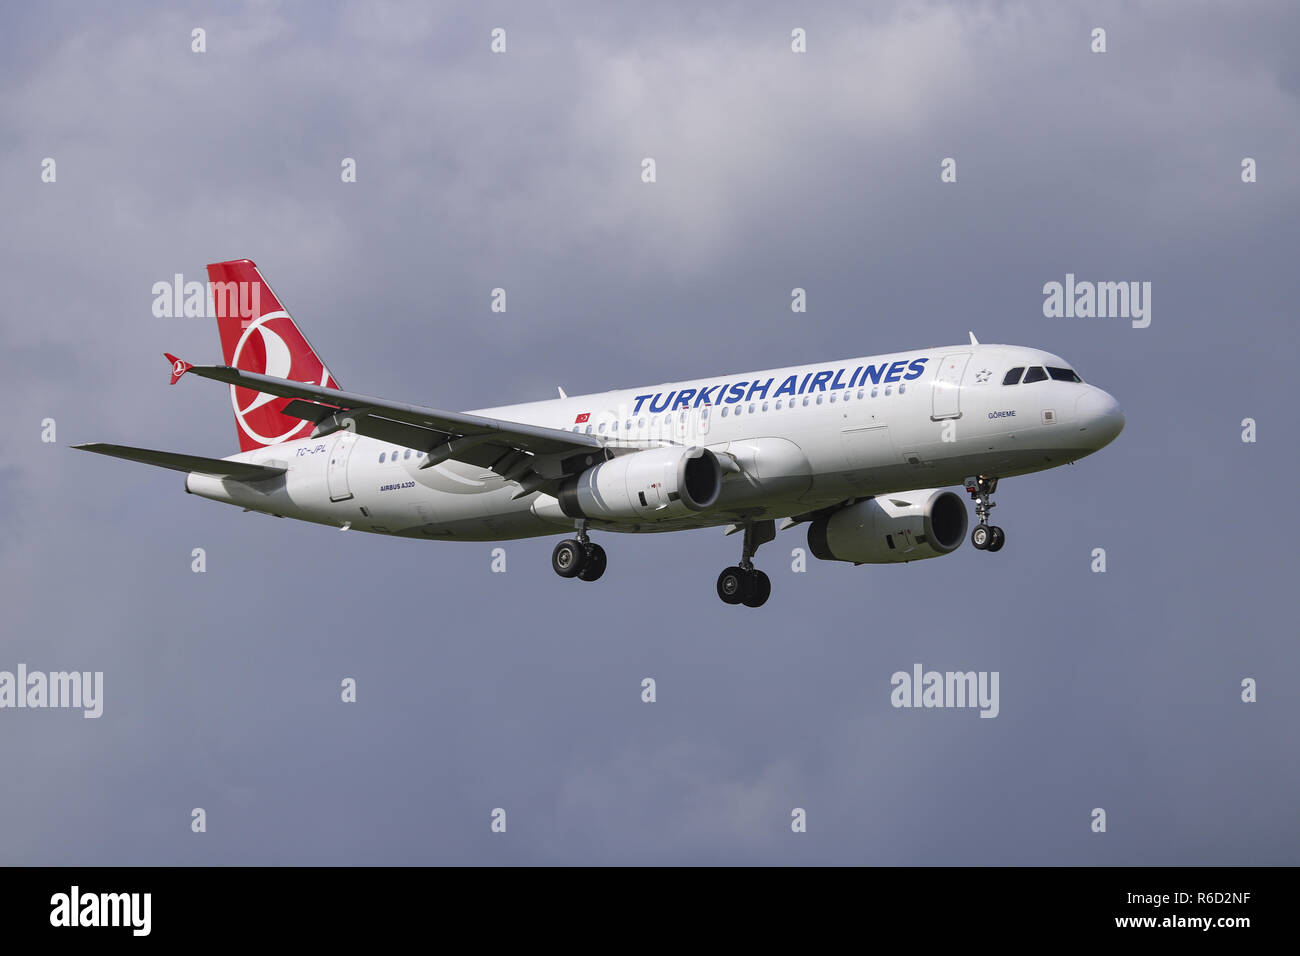 Netherlands. 30th Aug, 2018. Turkish Airlines Airbus A320-200 seen landing at the Amsterdam Schiphol International Airport in the Netherlands on a sunny day. The aircraft is an Airbus A320-232, equipped with two V2500 engines, with registration TC-JPL and airplane name Goreme. Turkish Airlines TK connects Amsterdam AMS/EHAM to Istanbul AtatÃ¼rk IST/LTBA airport and Istanbul Sabiha GÃ¶kçen SAW/LTFJ in Turkey. Credit: Nicolas Economou/SOPA Images/ZUMA Wire/Alamy Live News Stock Photo